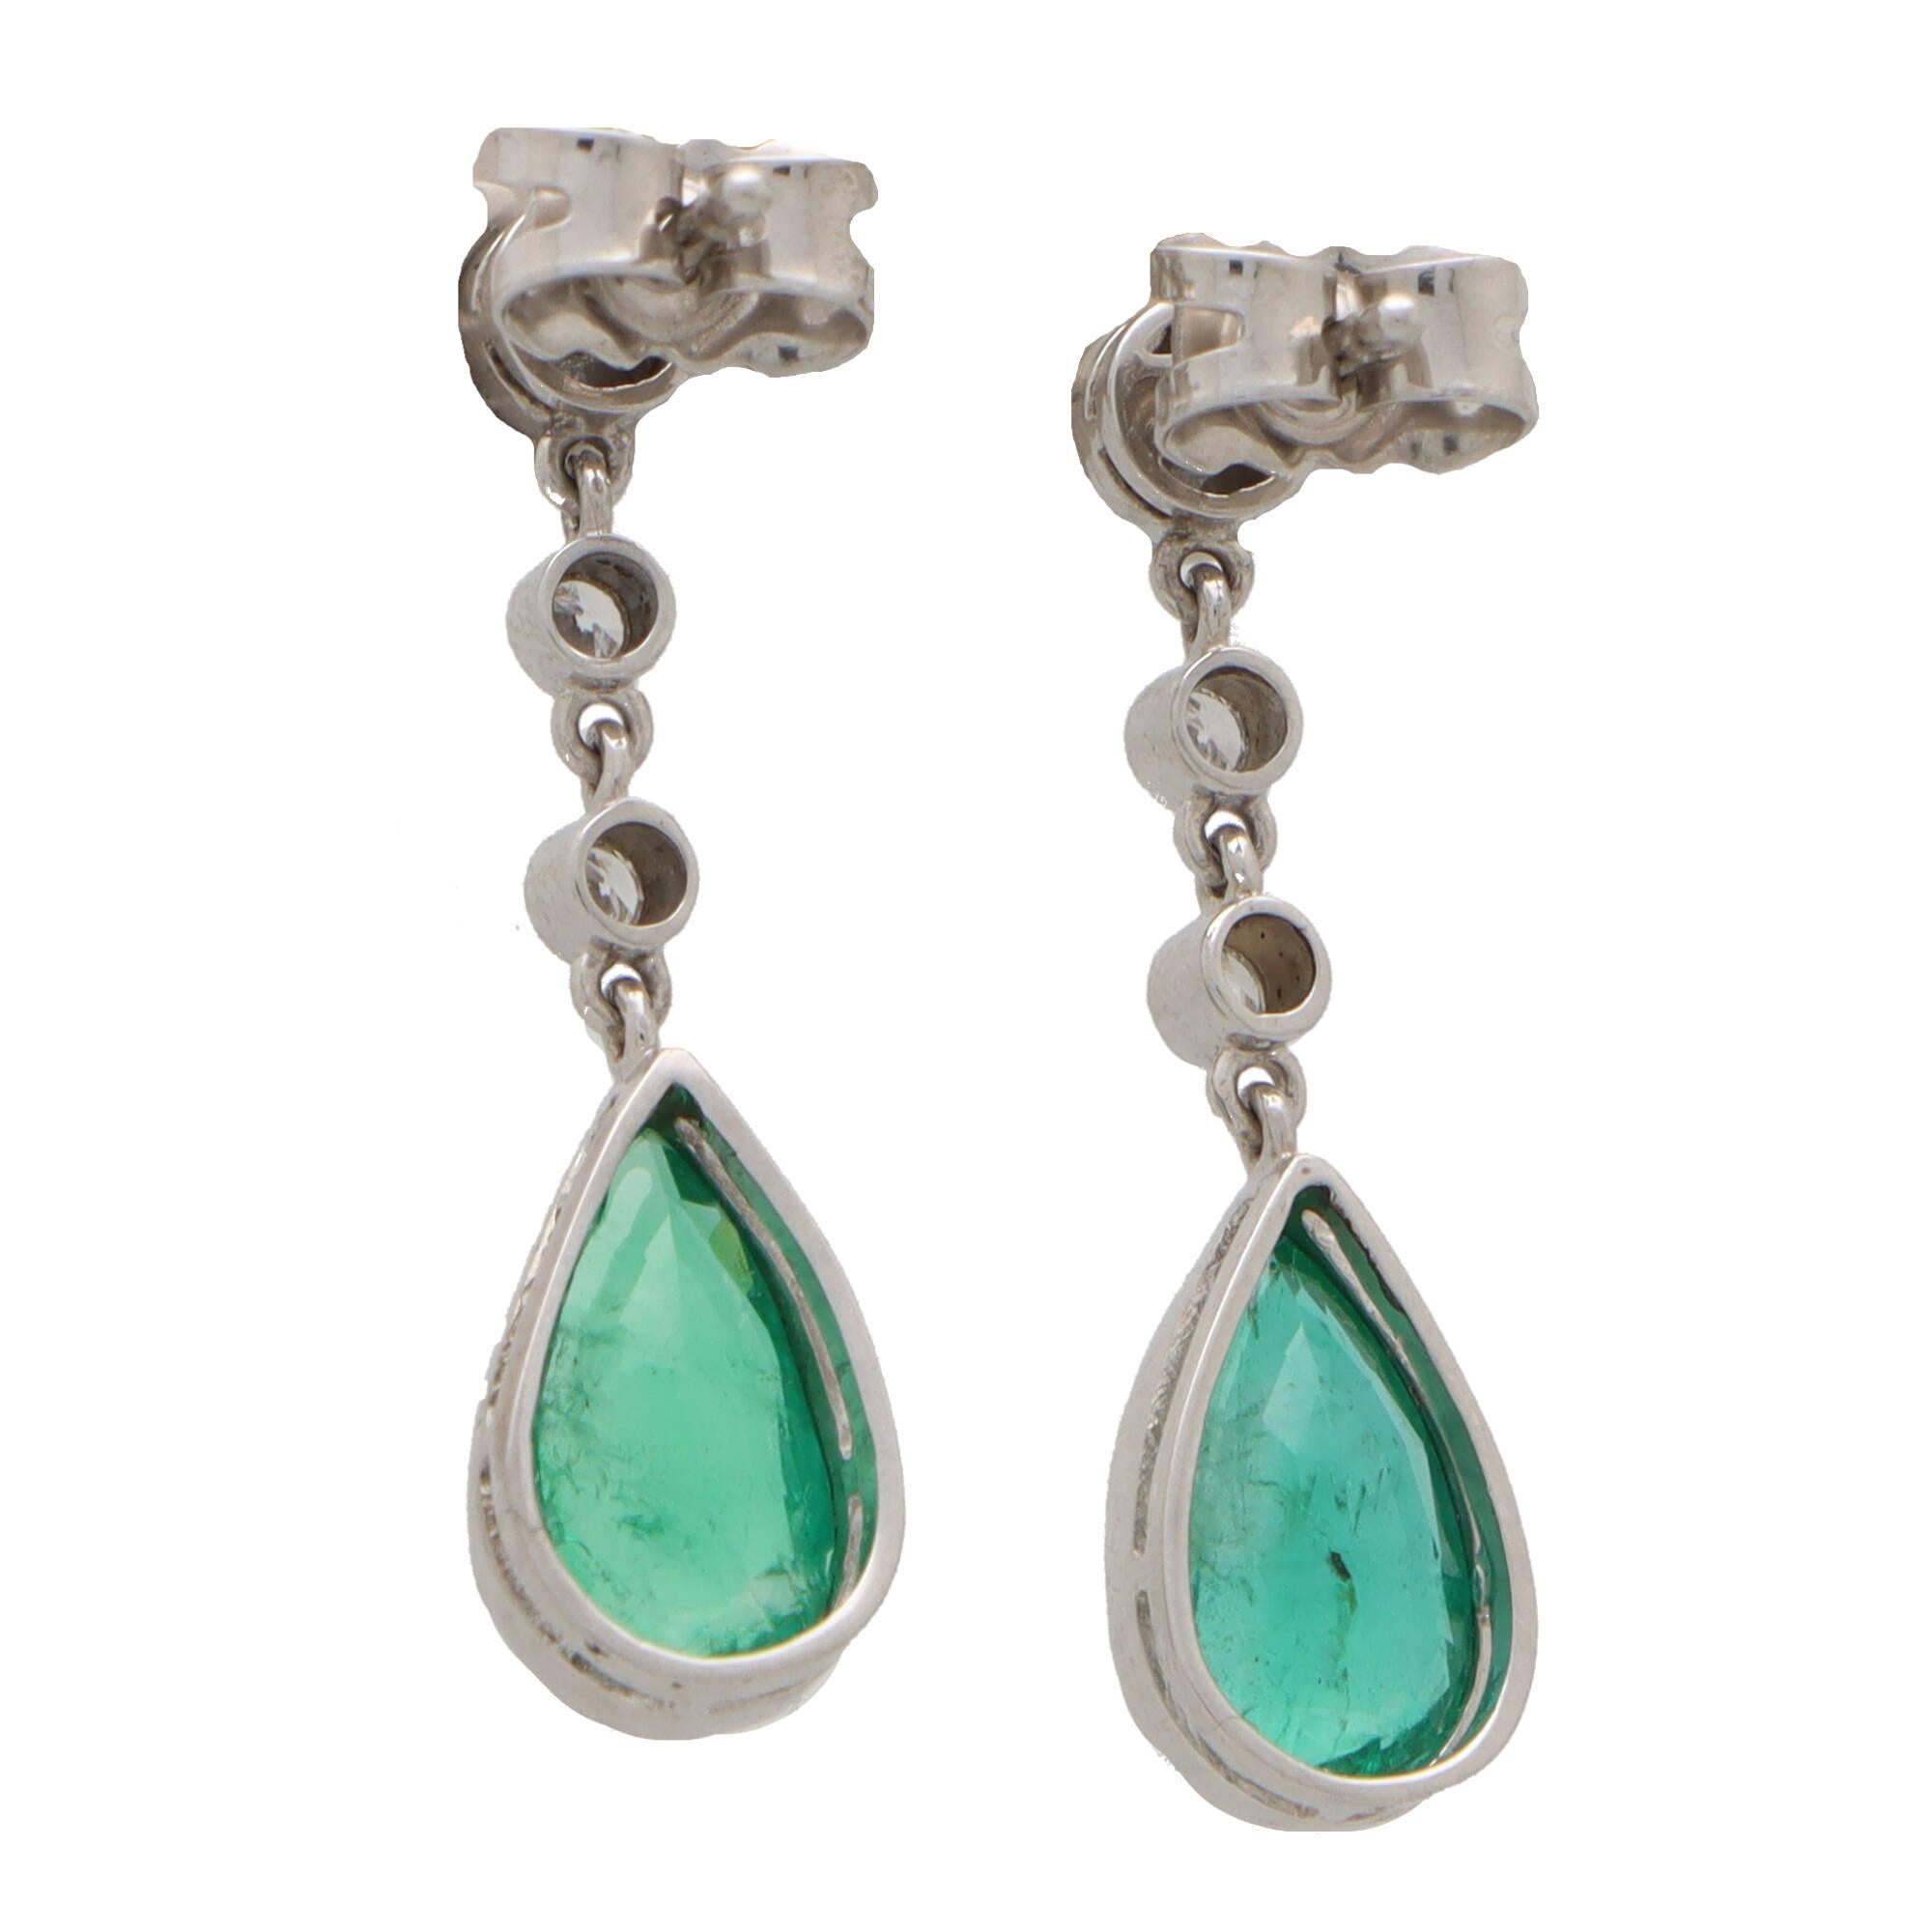 Contemporary Pear Cut Emerald and Diamond Drop Earrings Set in 18k White Gold 1